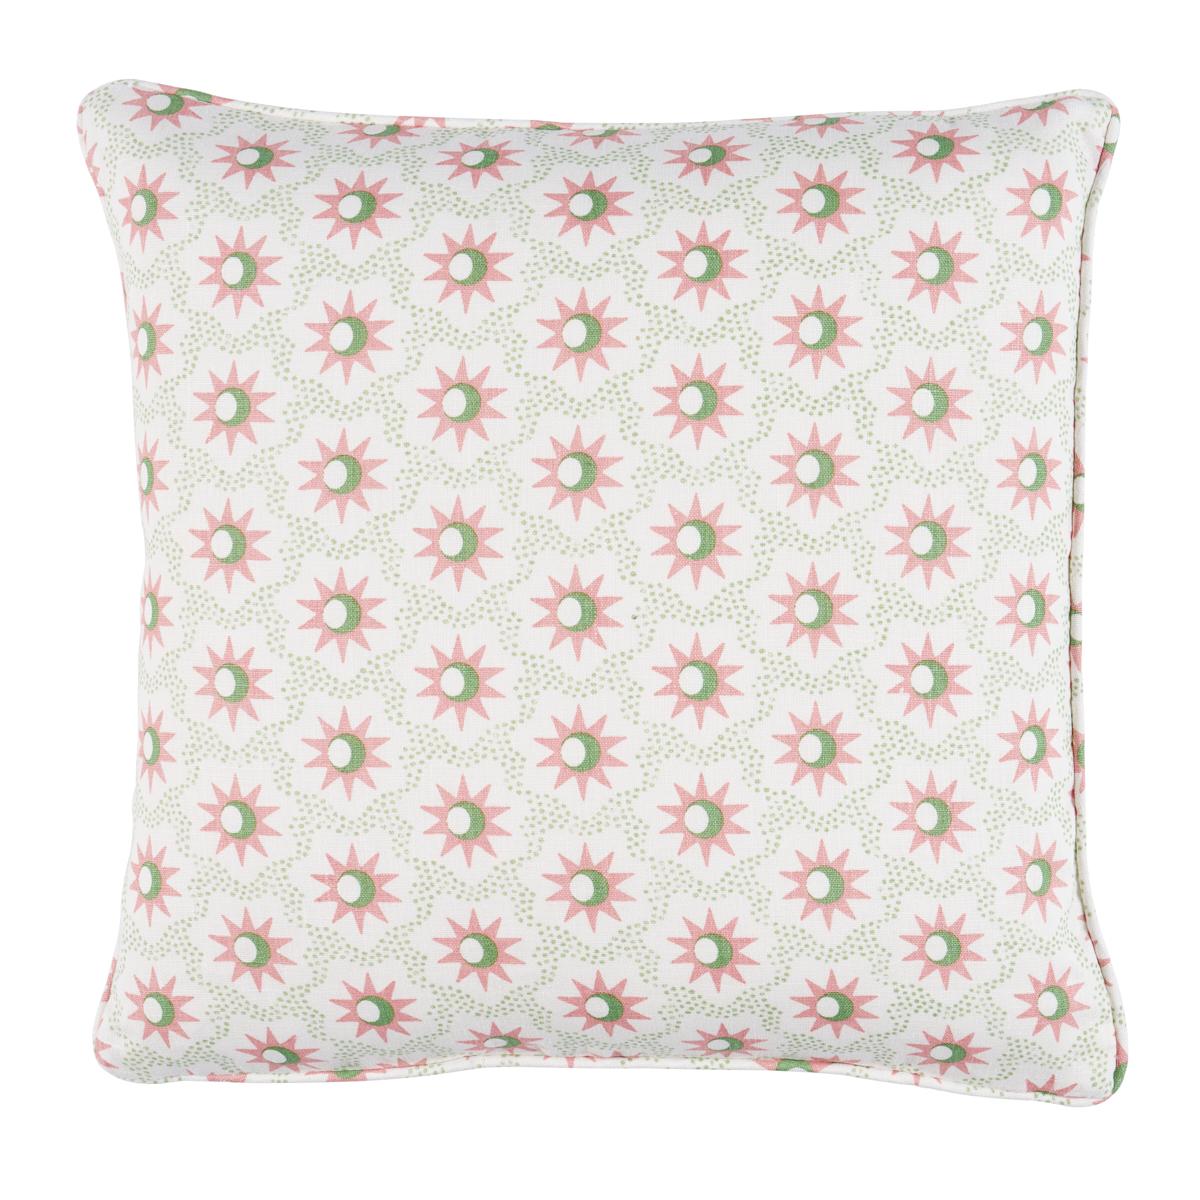 Lucie Pillow in Pink & Green 16 x 16" For Sale